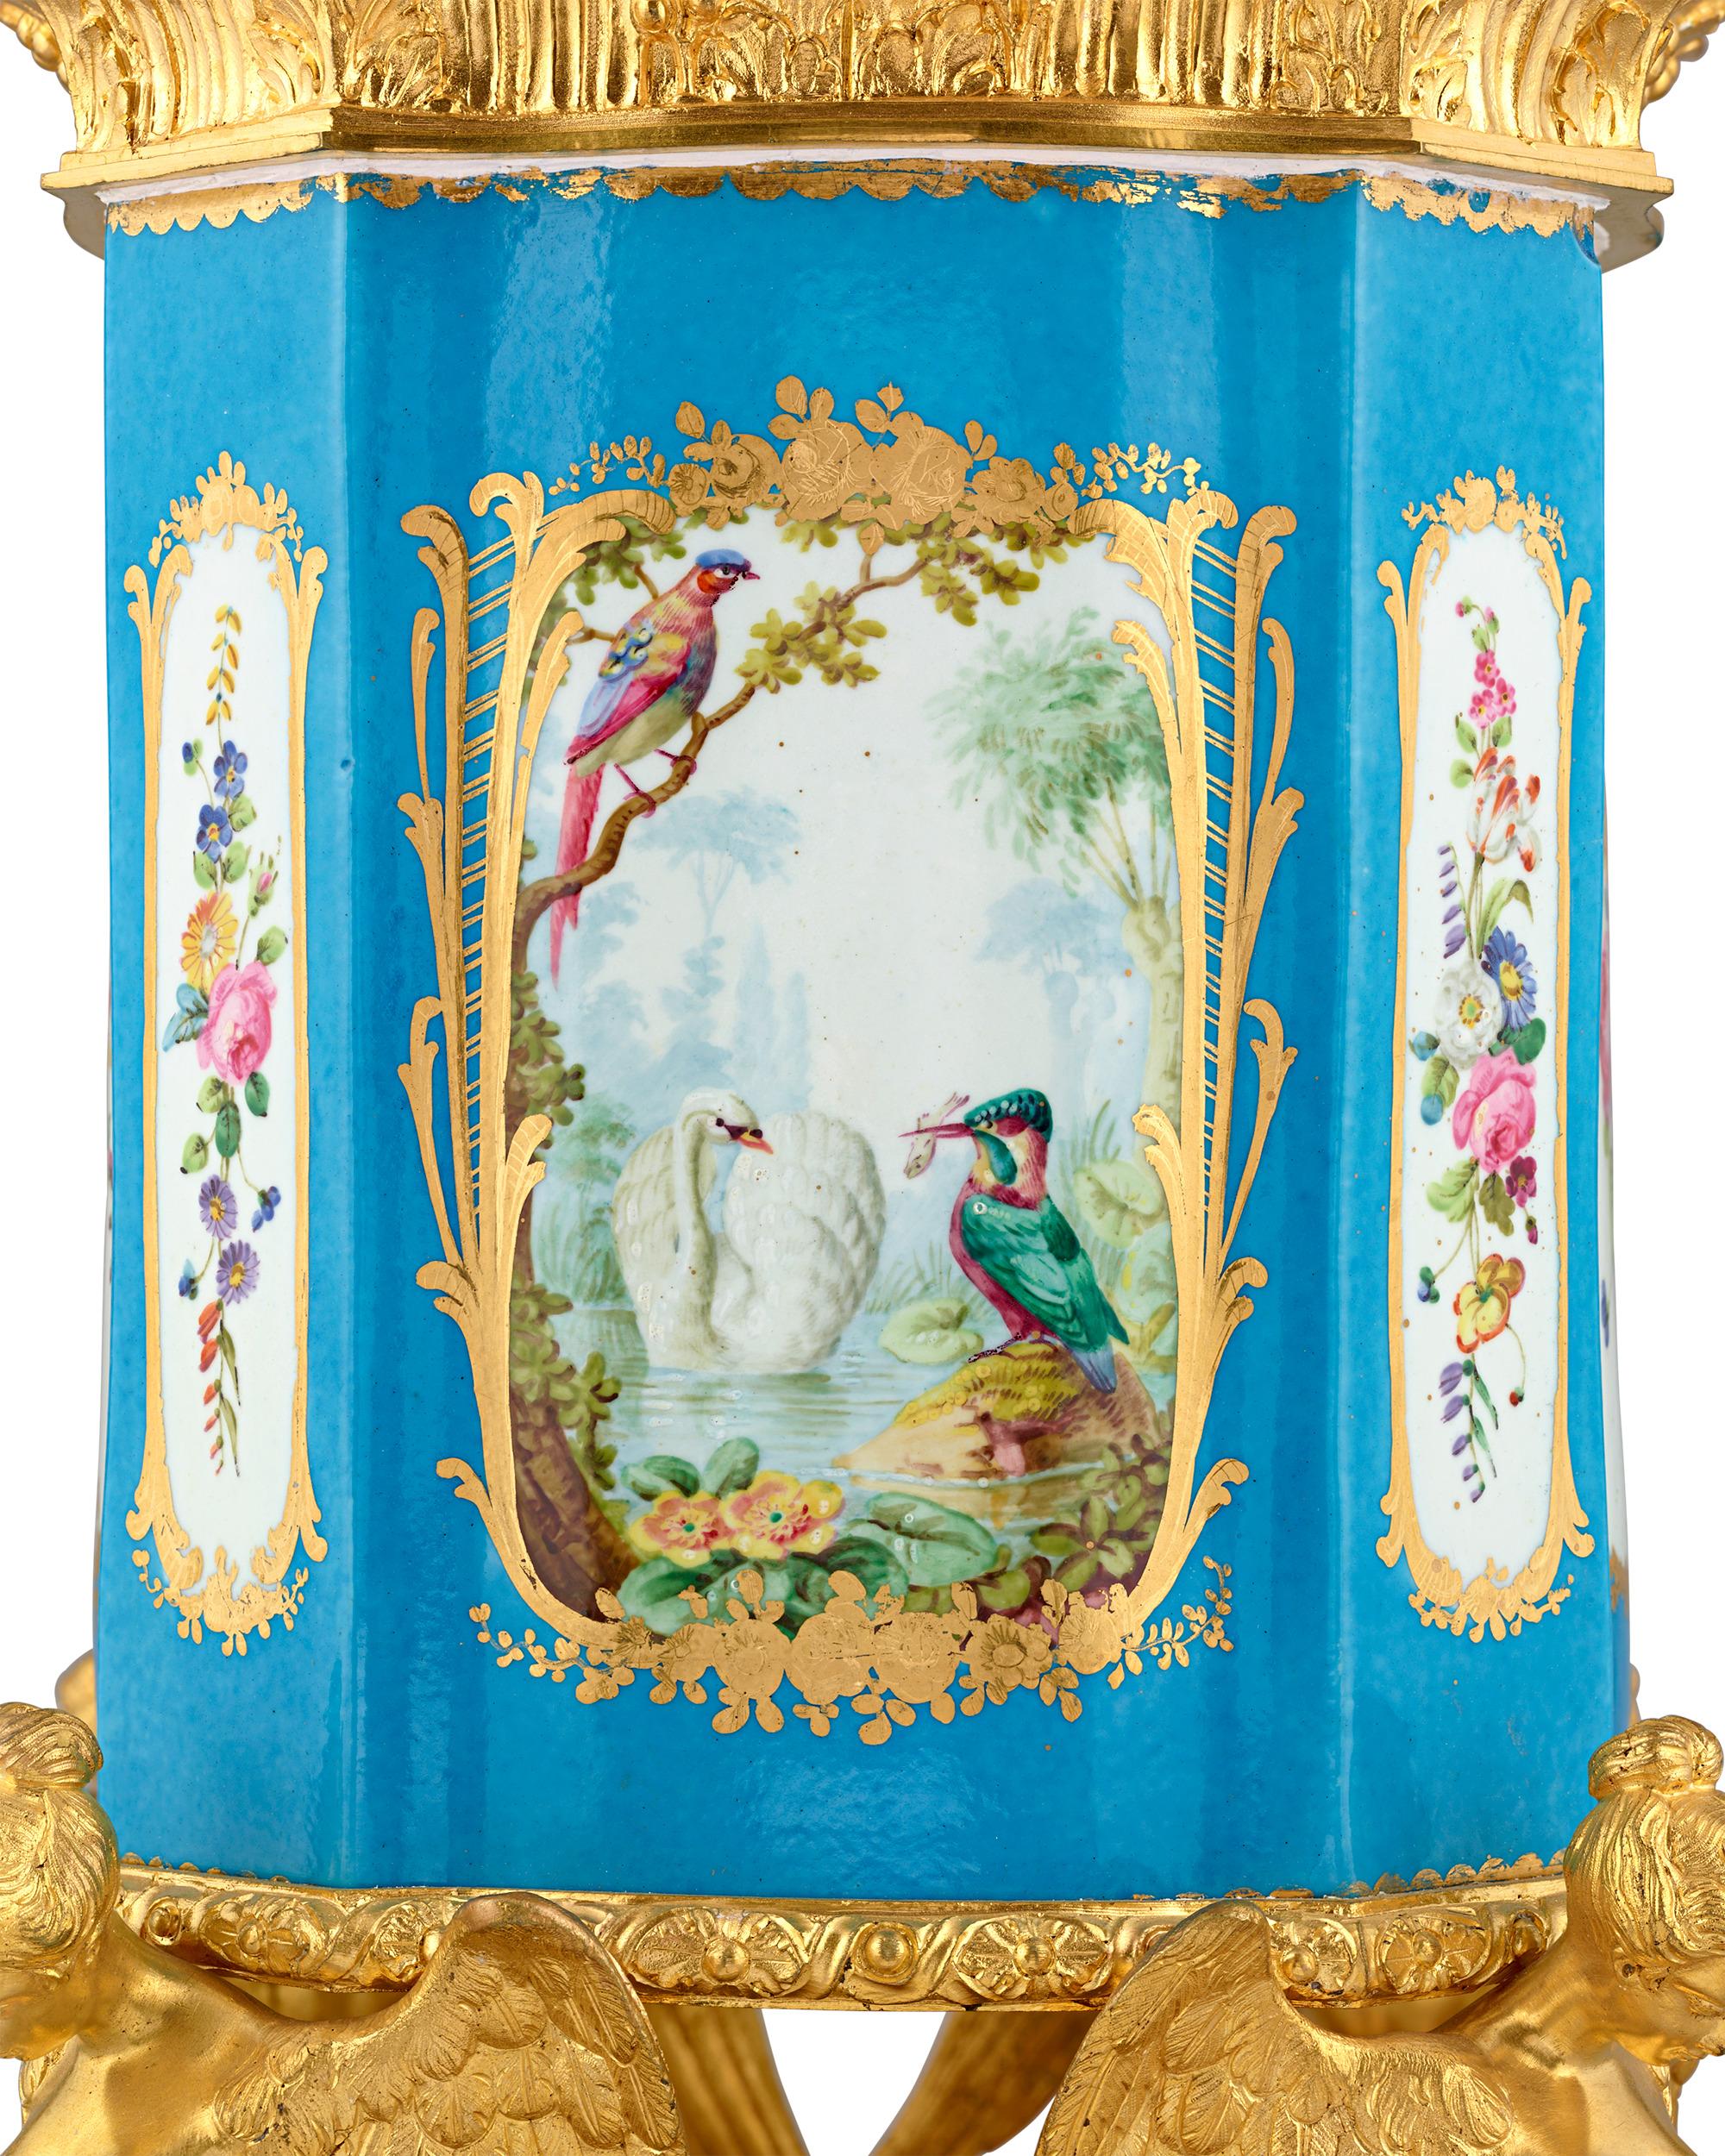 Drawing from the luxury of Sèvres Porcelain and Louis XV's famed bleu céleste service from Versailles, this elegant French porcelain vase features the trademark shade of blue and medallions revealing scenes of flora and fauna, including pheasants